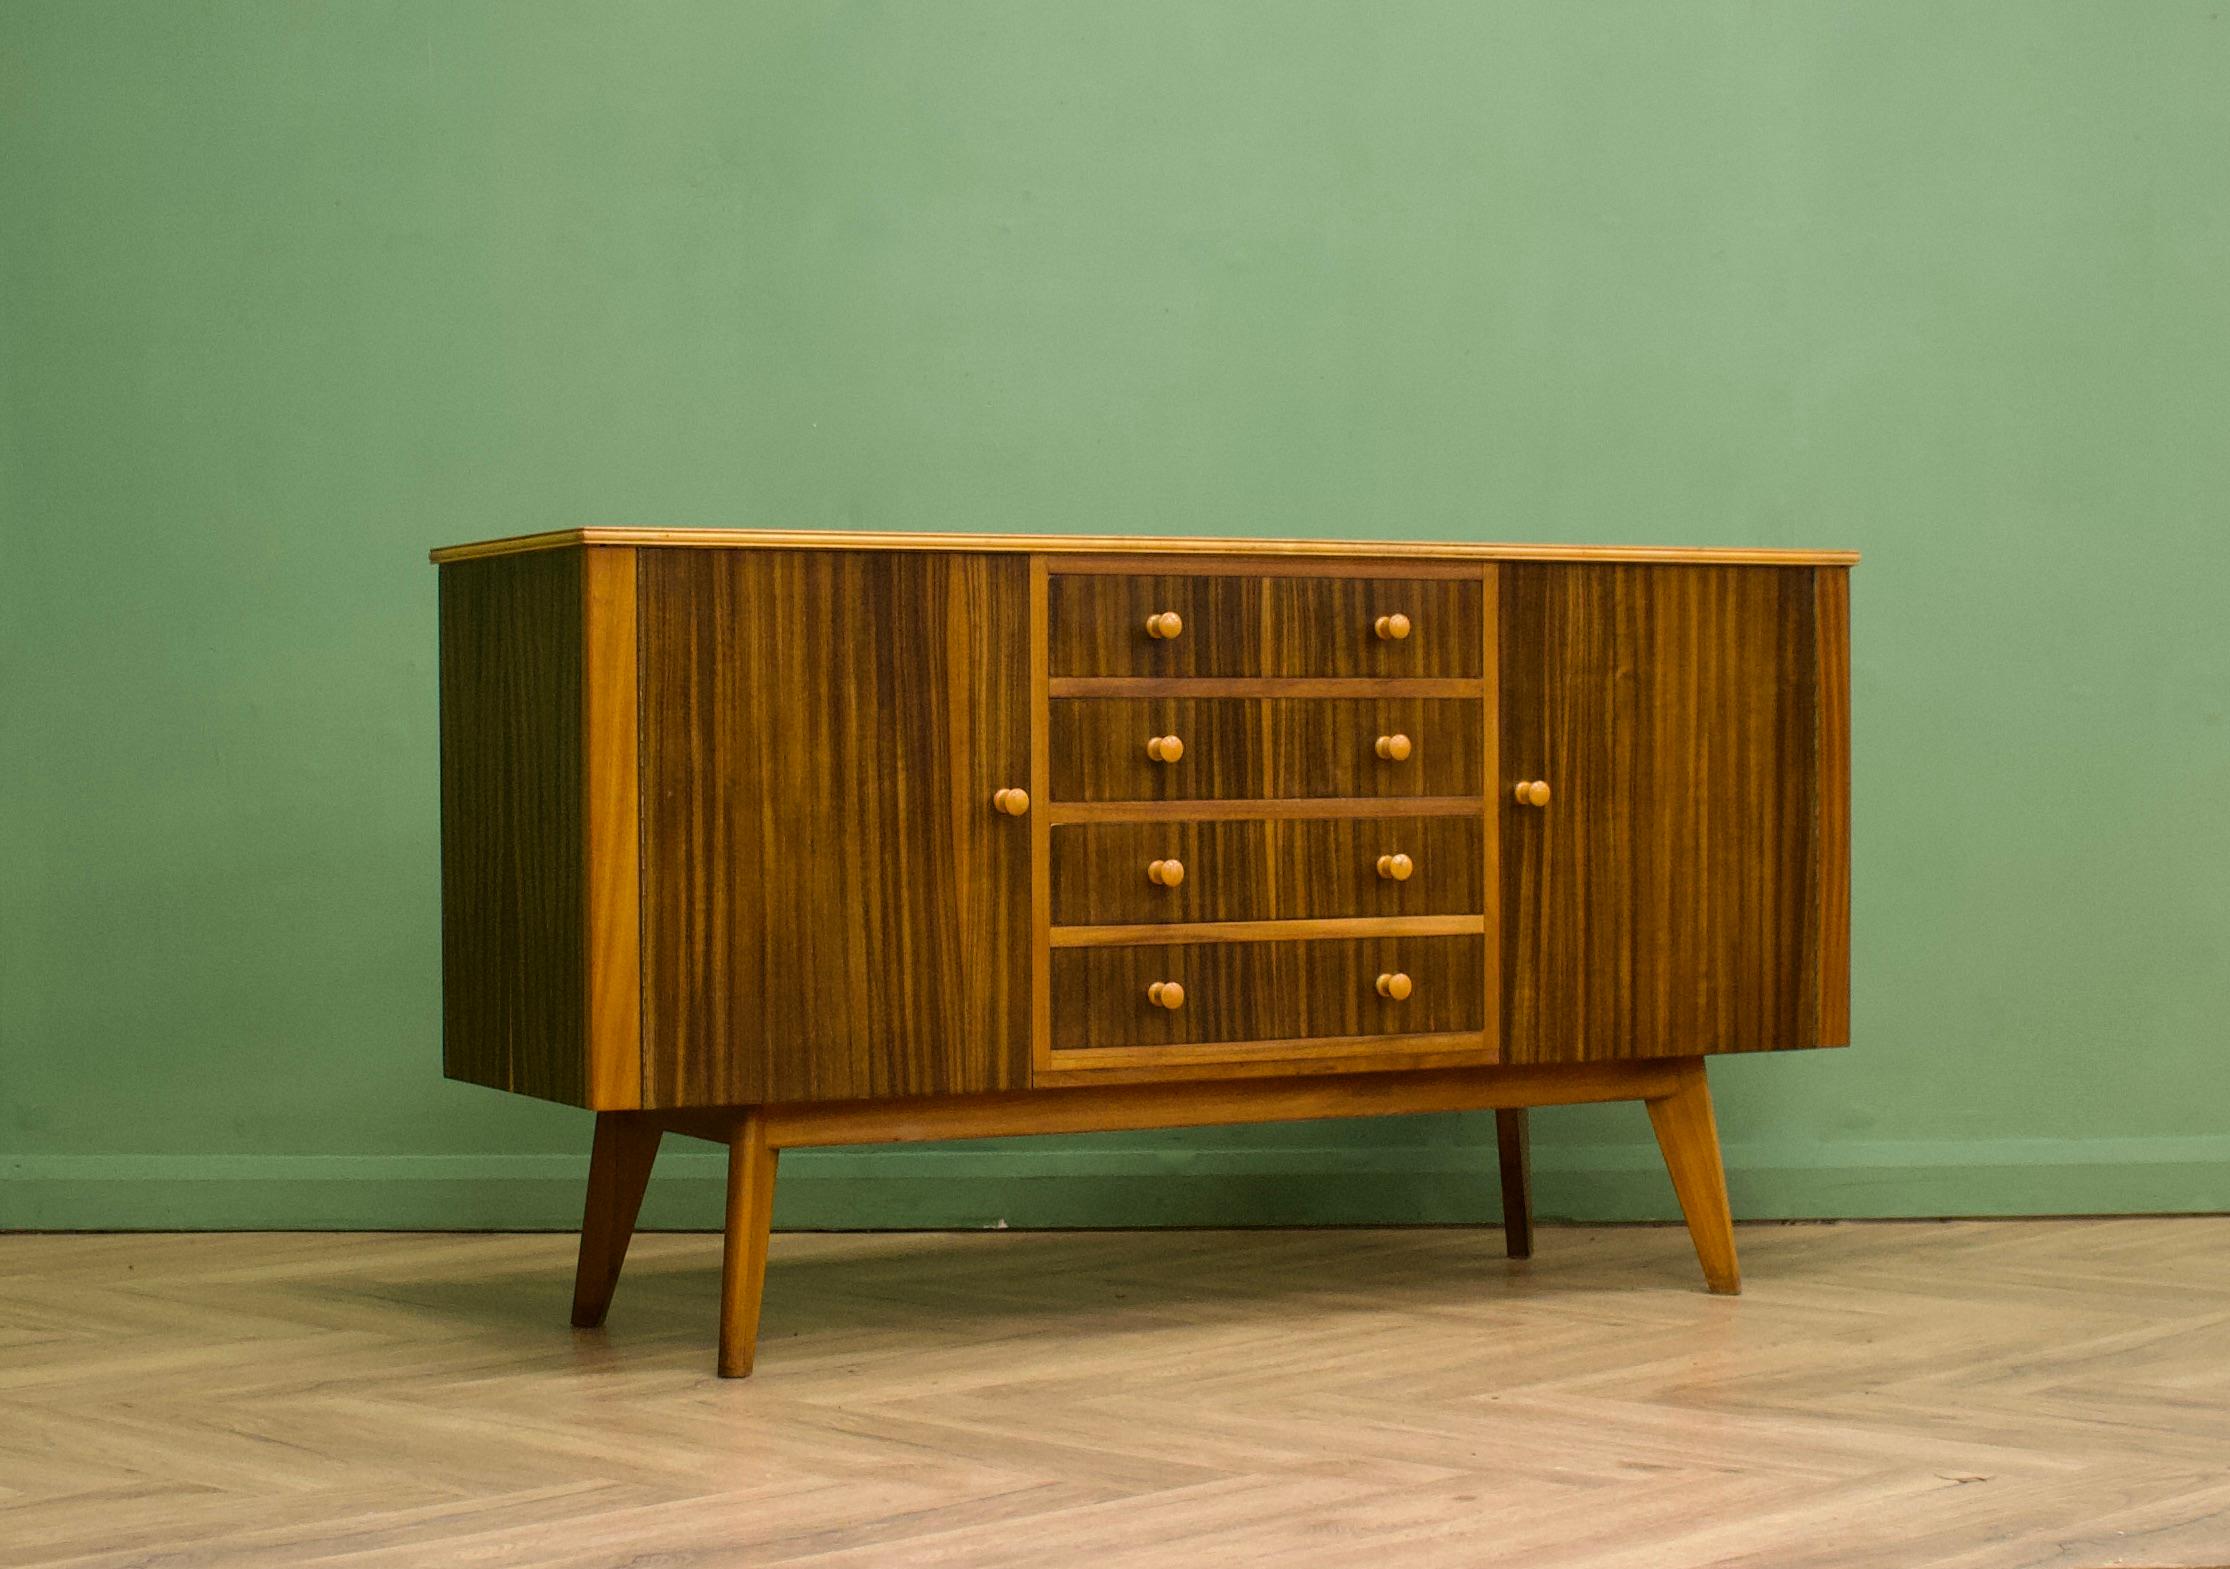 A walnut sideboard from Morris of Glasgow - designed by Neil Morris for the Cumbrae range

The attractive legs are slightly tapered and the handles are solid wood

Featuring two cupboards - with removable shelves and three drawers